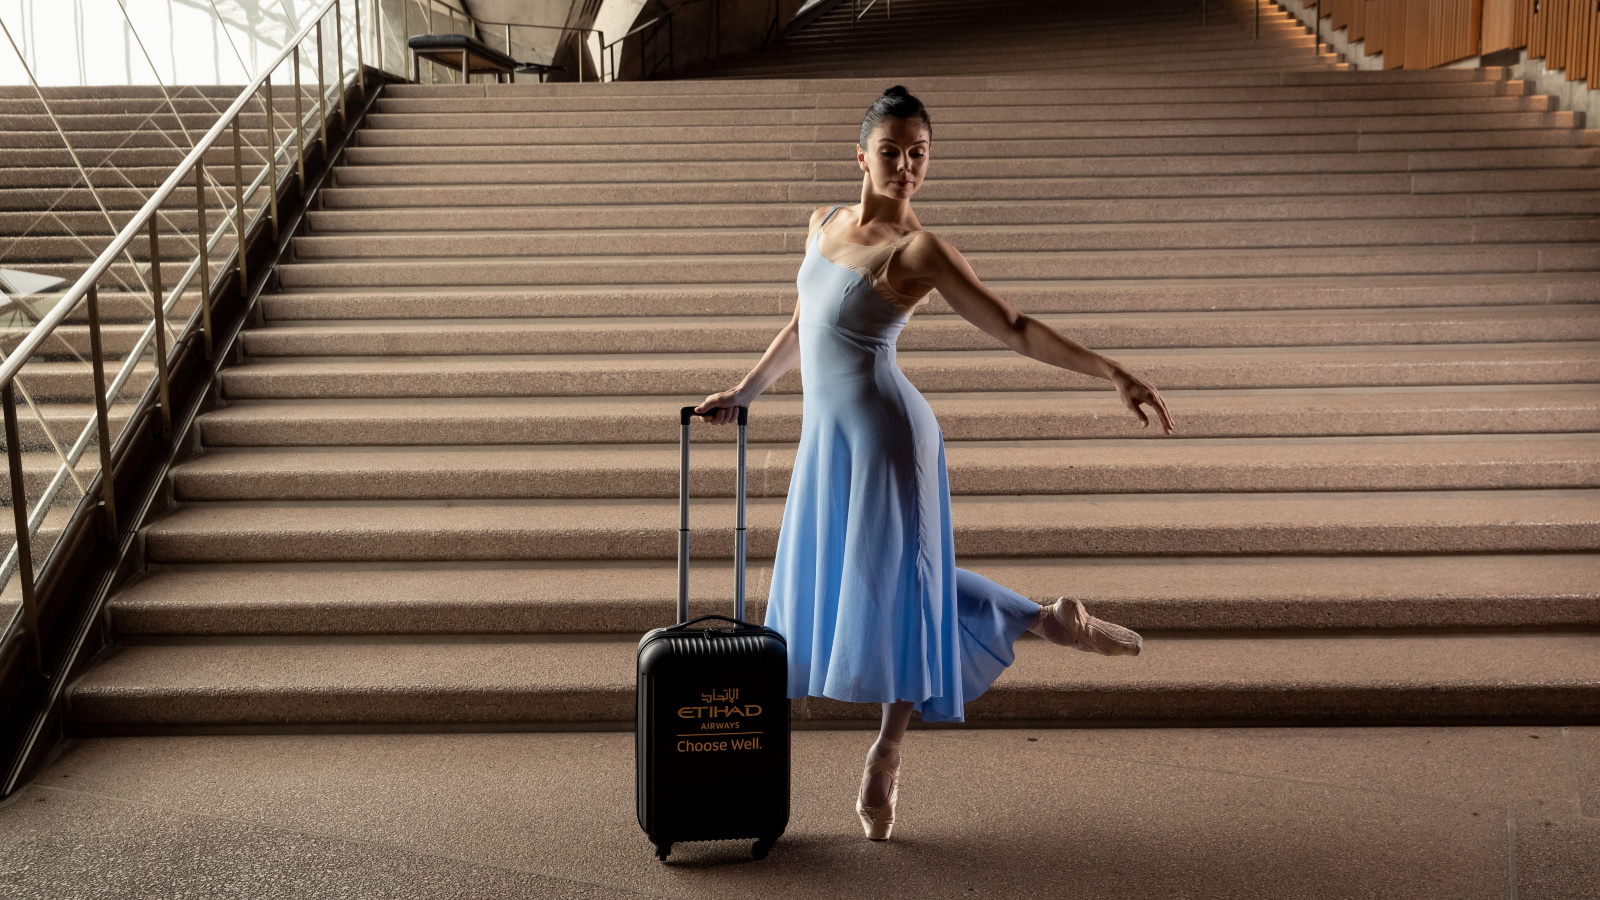 A ballerina in a blue dress posed with a suitcase on the steps of the Sydney Opera House.